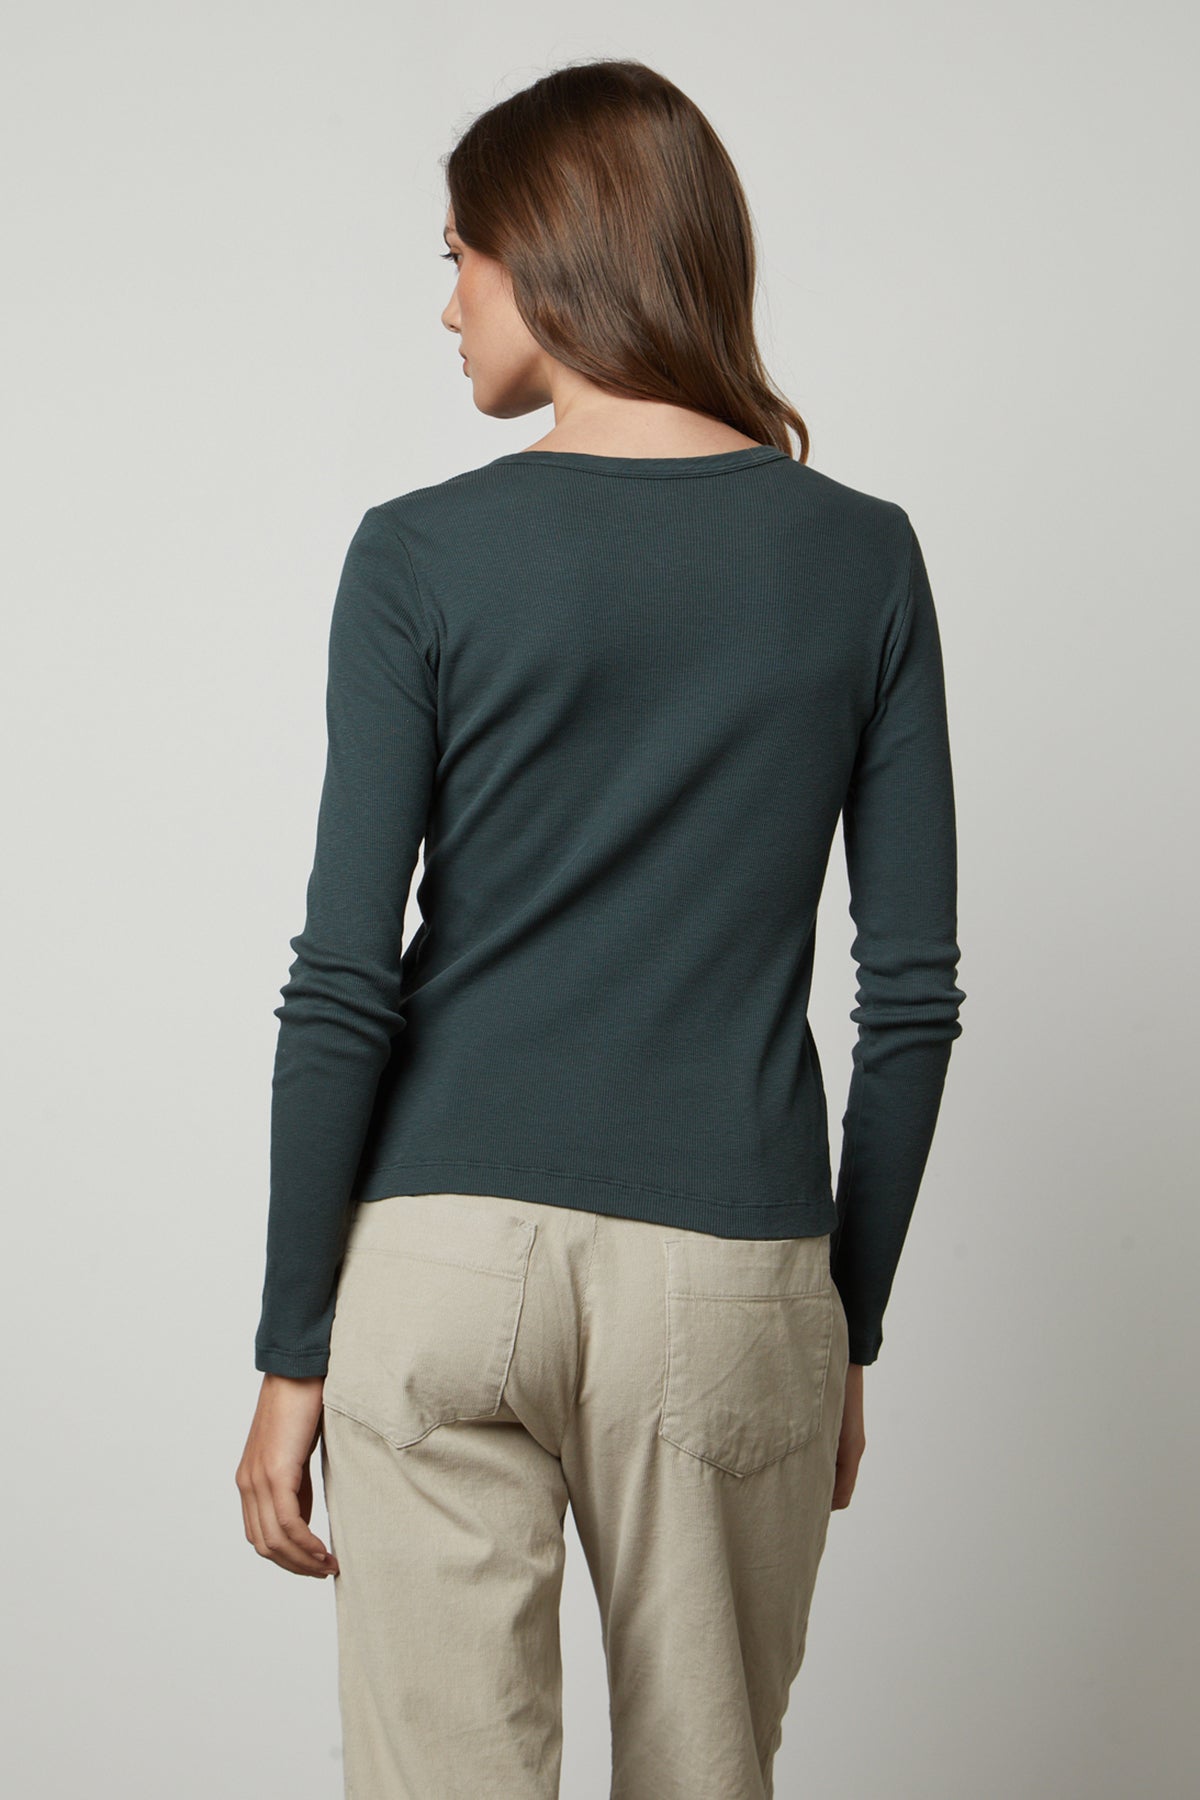   The back view of a woman wearing a Velvet by Graham & Spencer BAYLER RIBBED SCOOP NECK TEE top and khaki pants. 